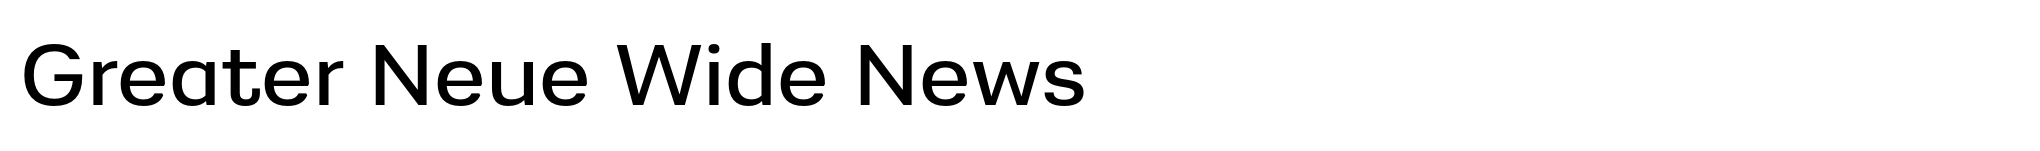 Greater Neue Wide News image